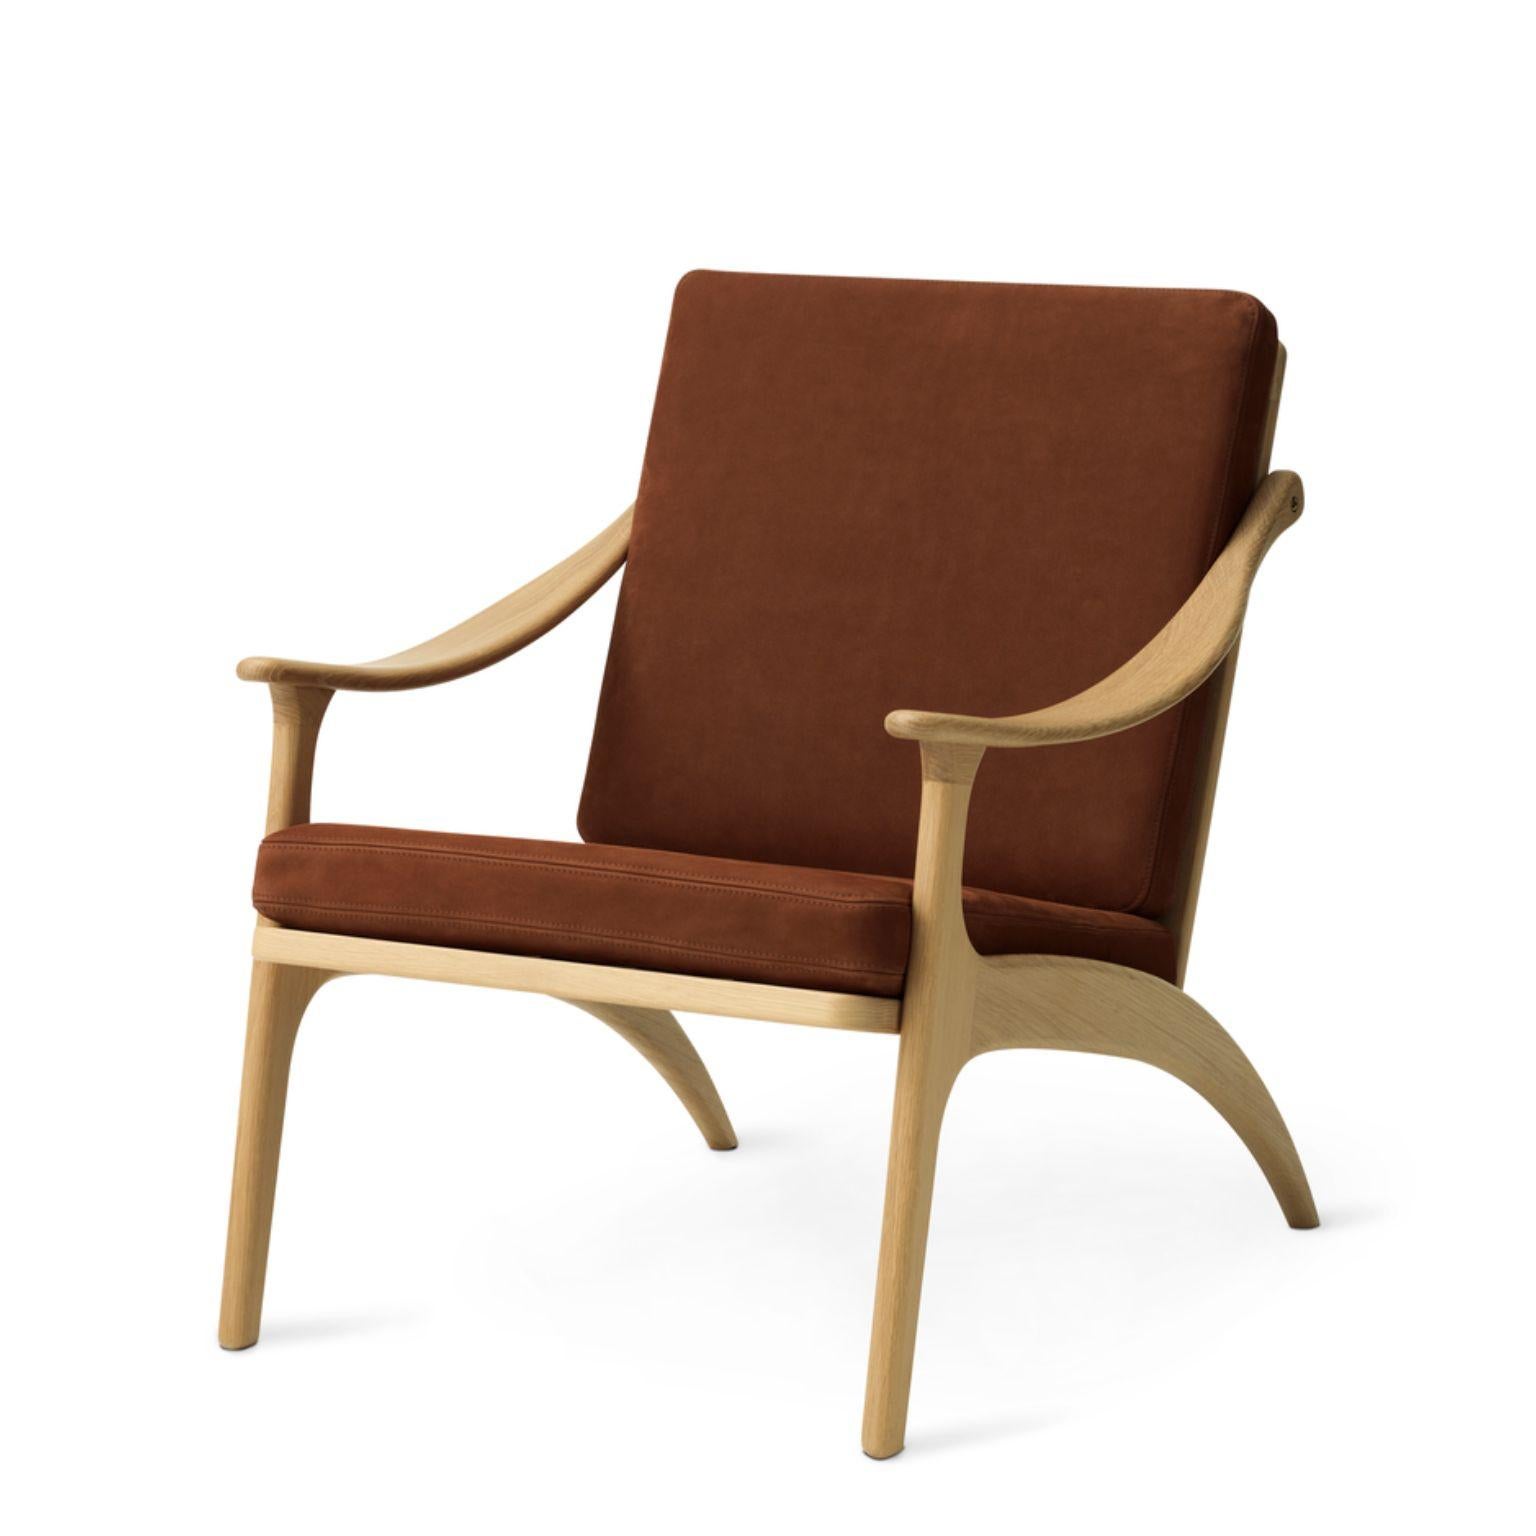 Lean Back Lounge Chair Nabuk White Oiled Oak Terra by Warm Nordic
Dimensions: D68 x W78 x H 78 cm
Material: White oiled solid oak, Foam, Textile upholstery
Weight: 9 kg
Also available in different colours, materials and finishes. Please contact